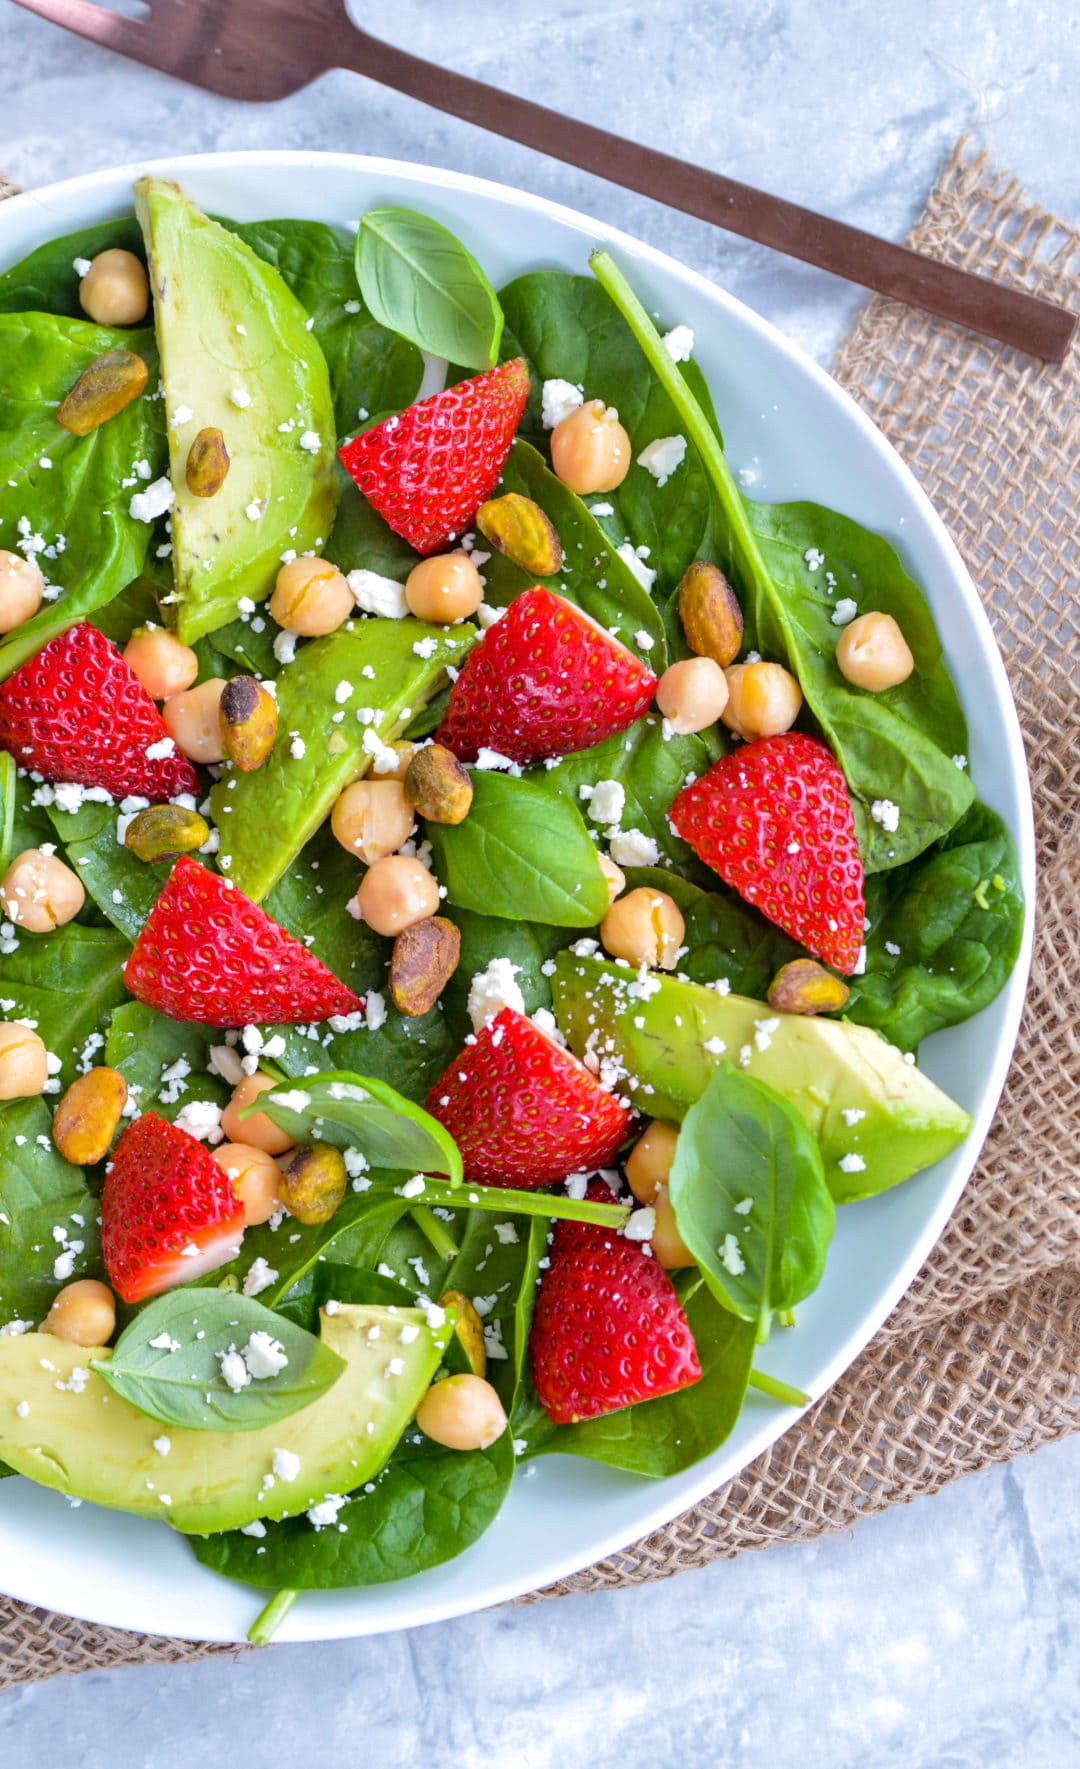 Strawberry Spinach Salad with Avocado